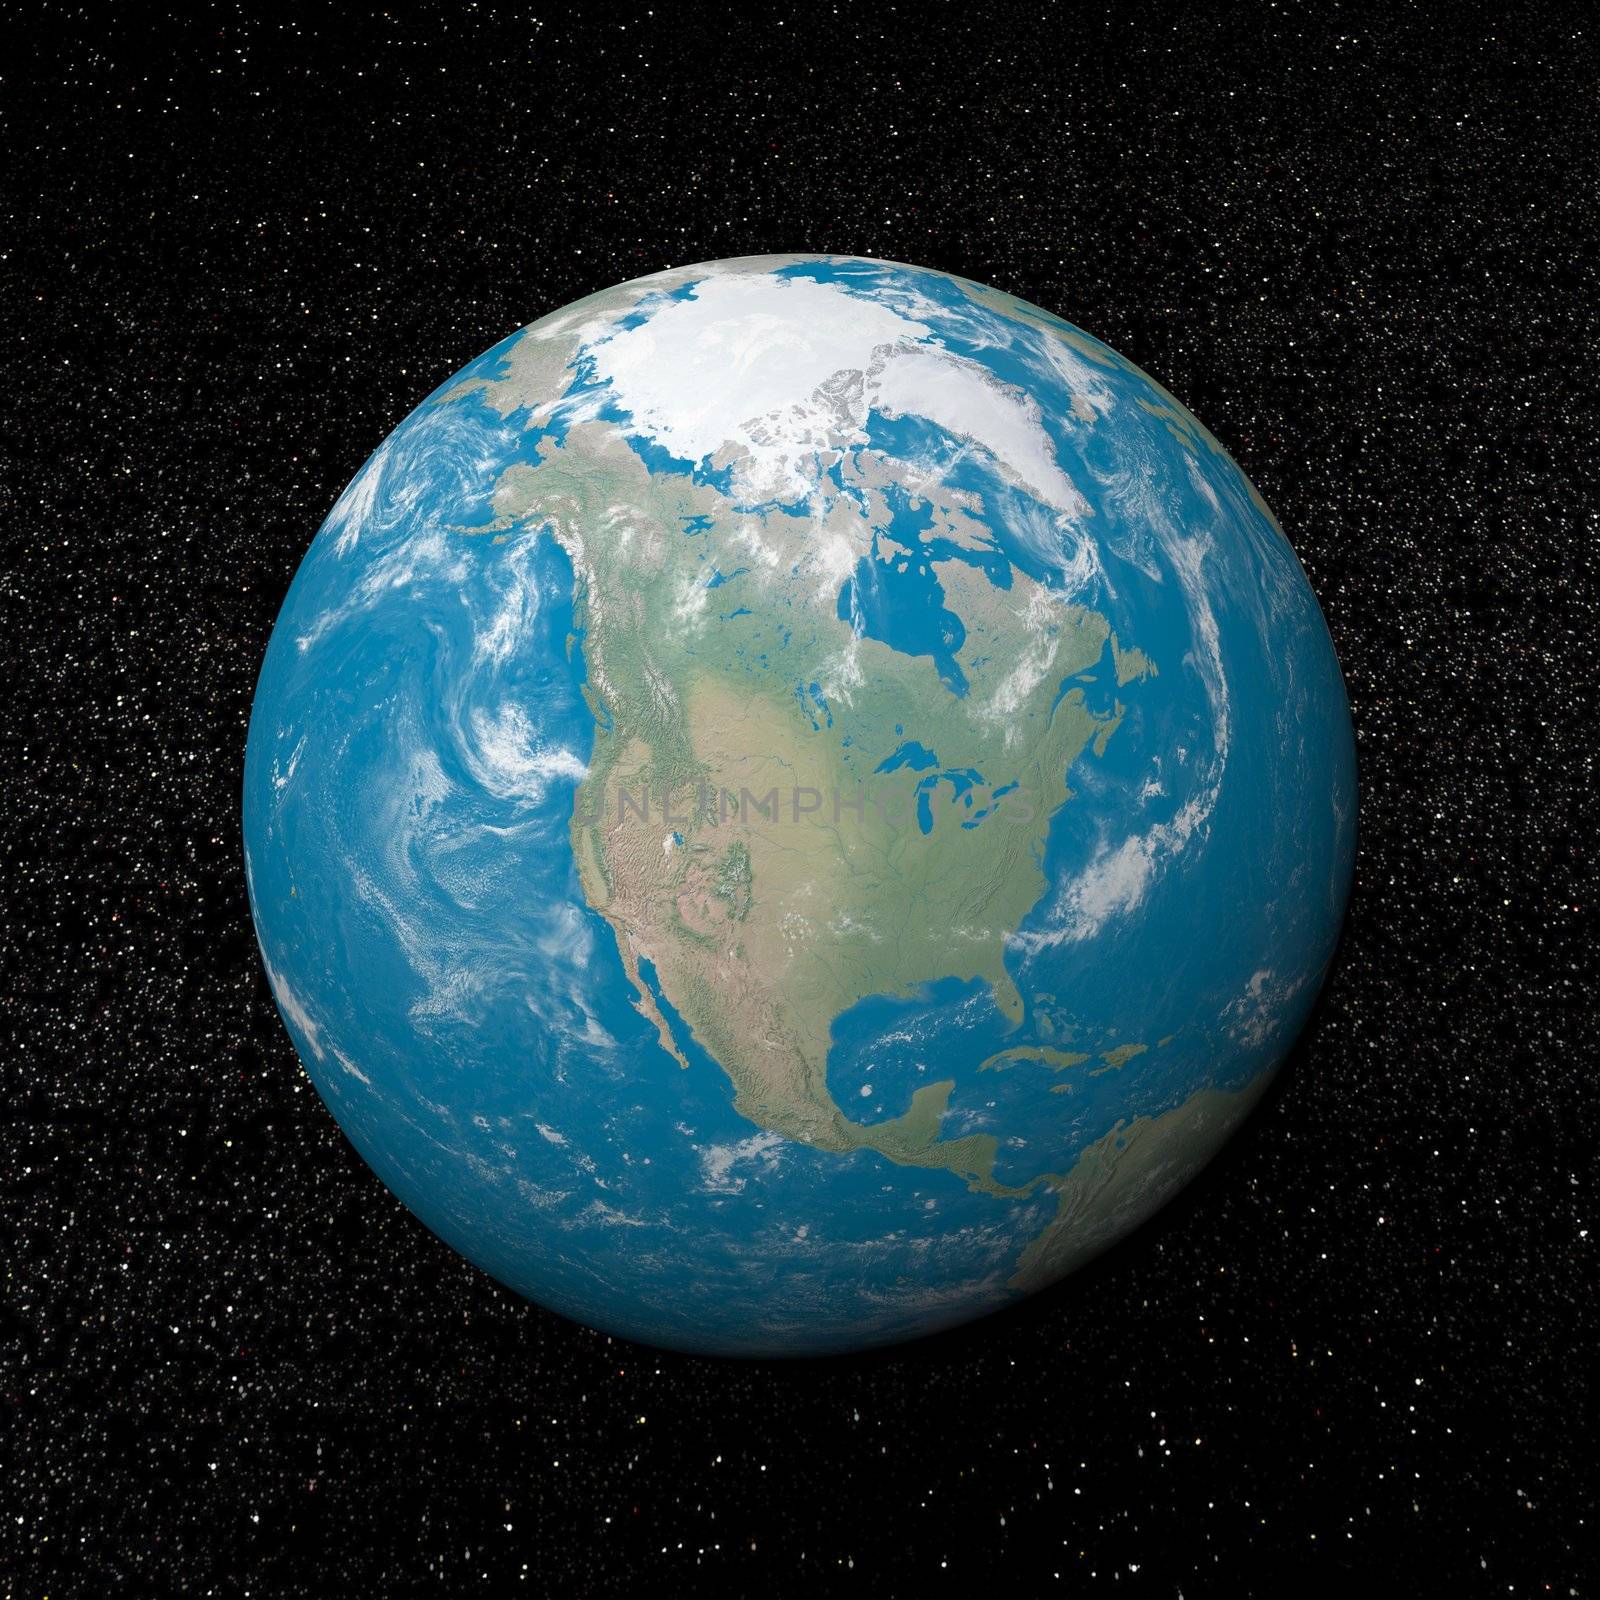 North america on earth and universe background with stars - 3D render